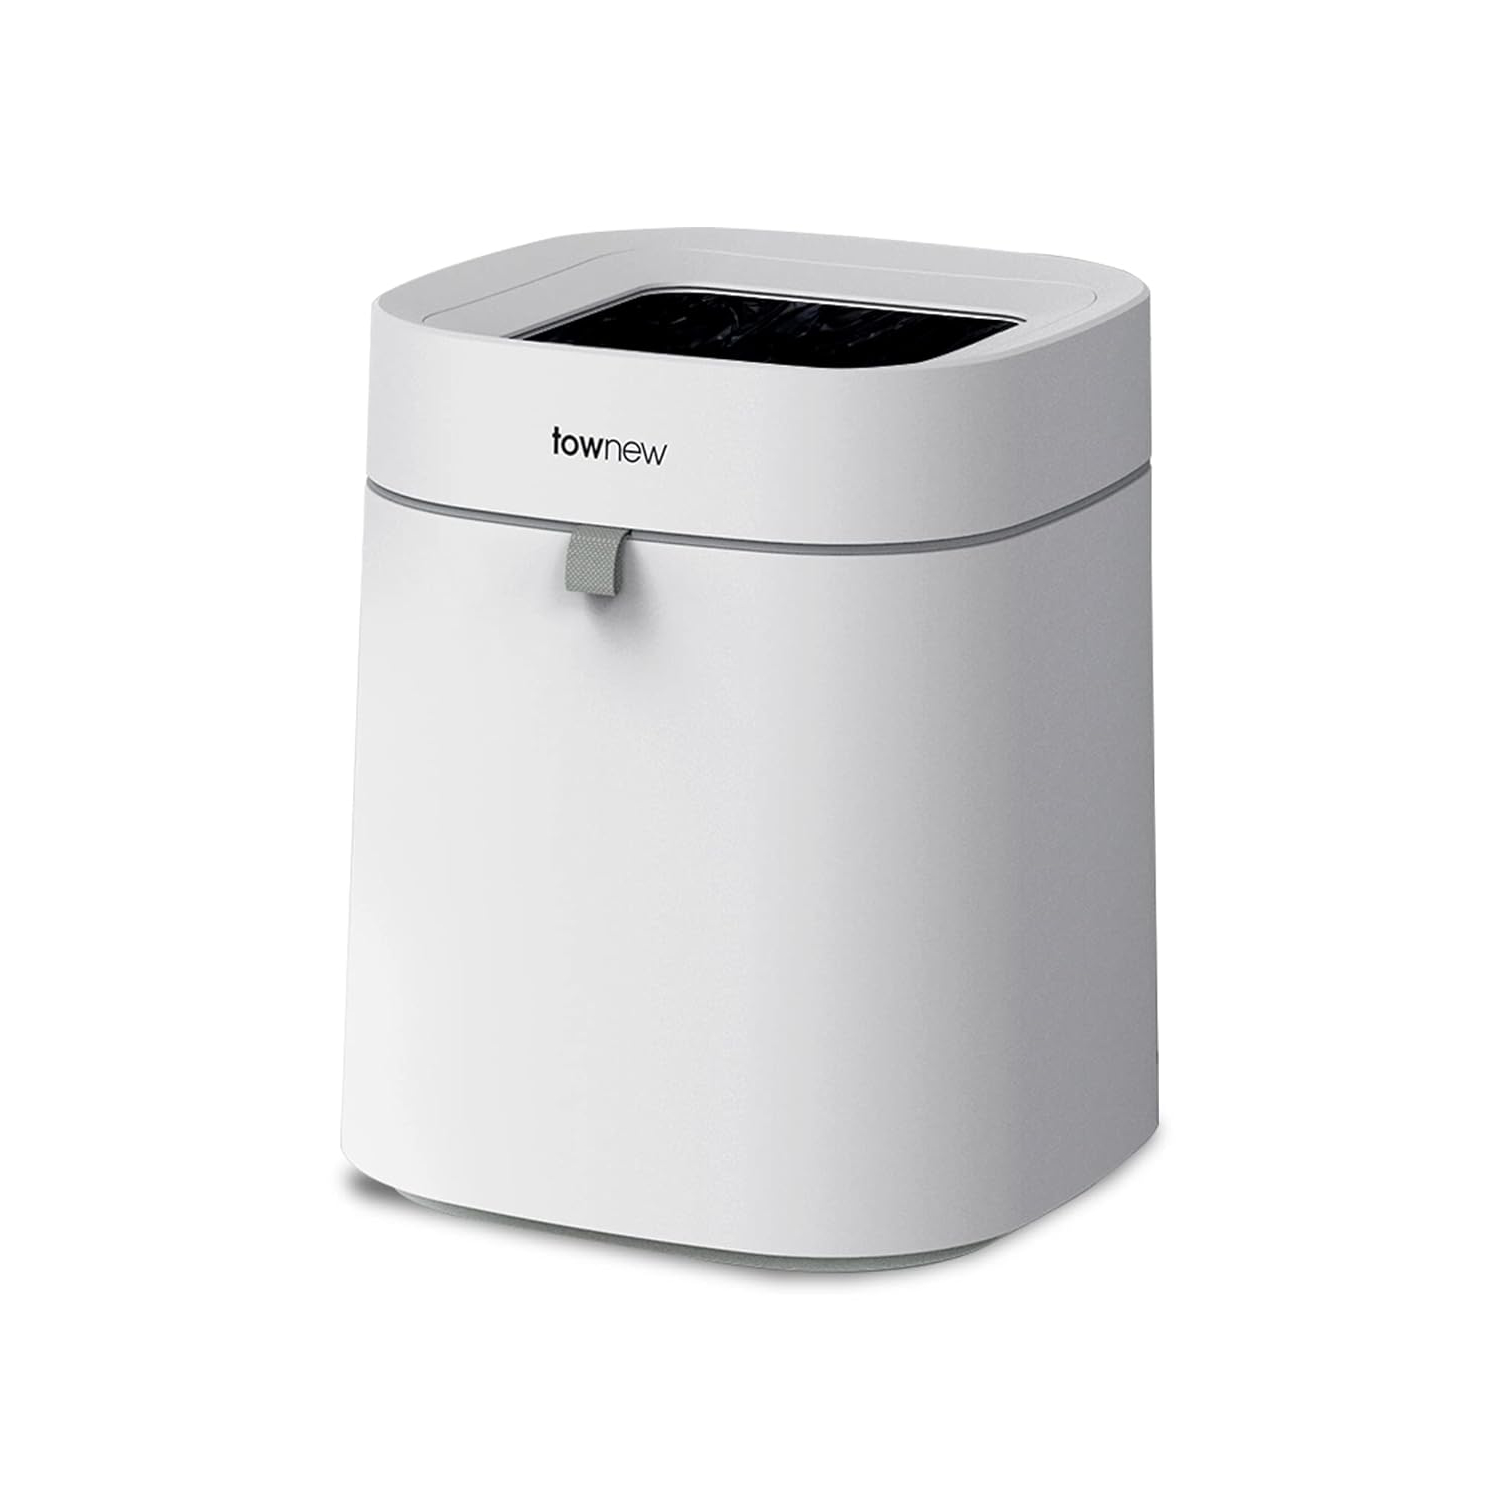 townew T Air Lite (T02B White) Auto Sealing & Self-Changing 4.4-Gallon Smart Trash Can with Open Top Barrel 